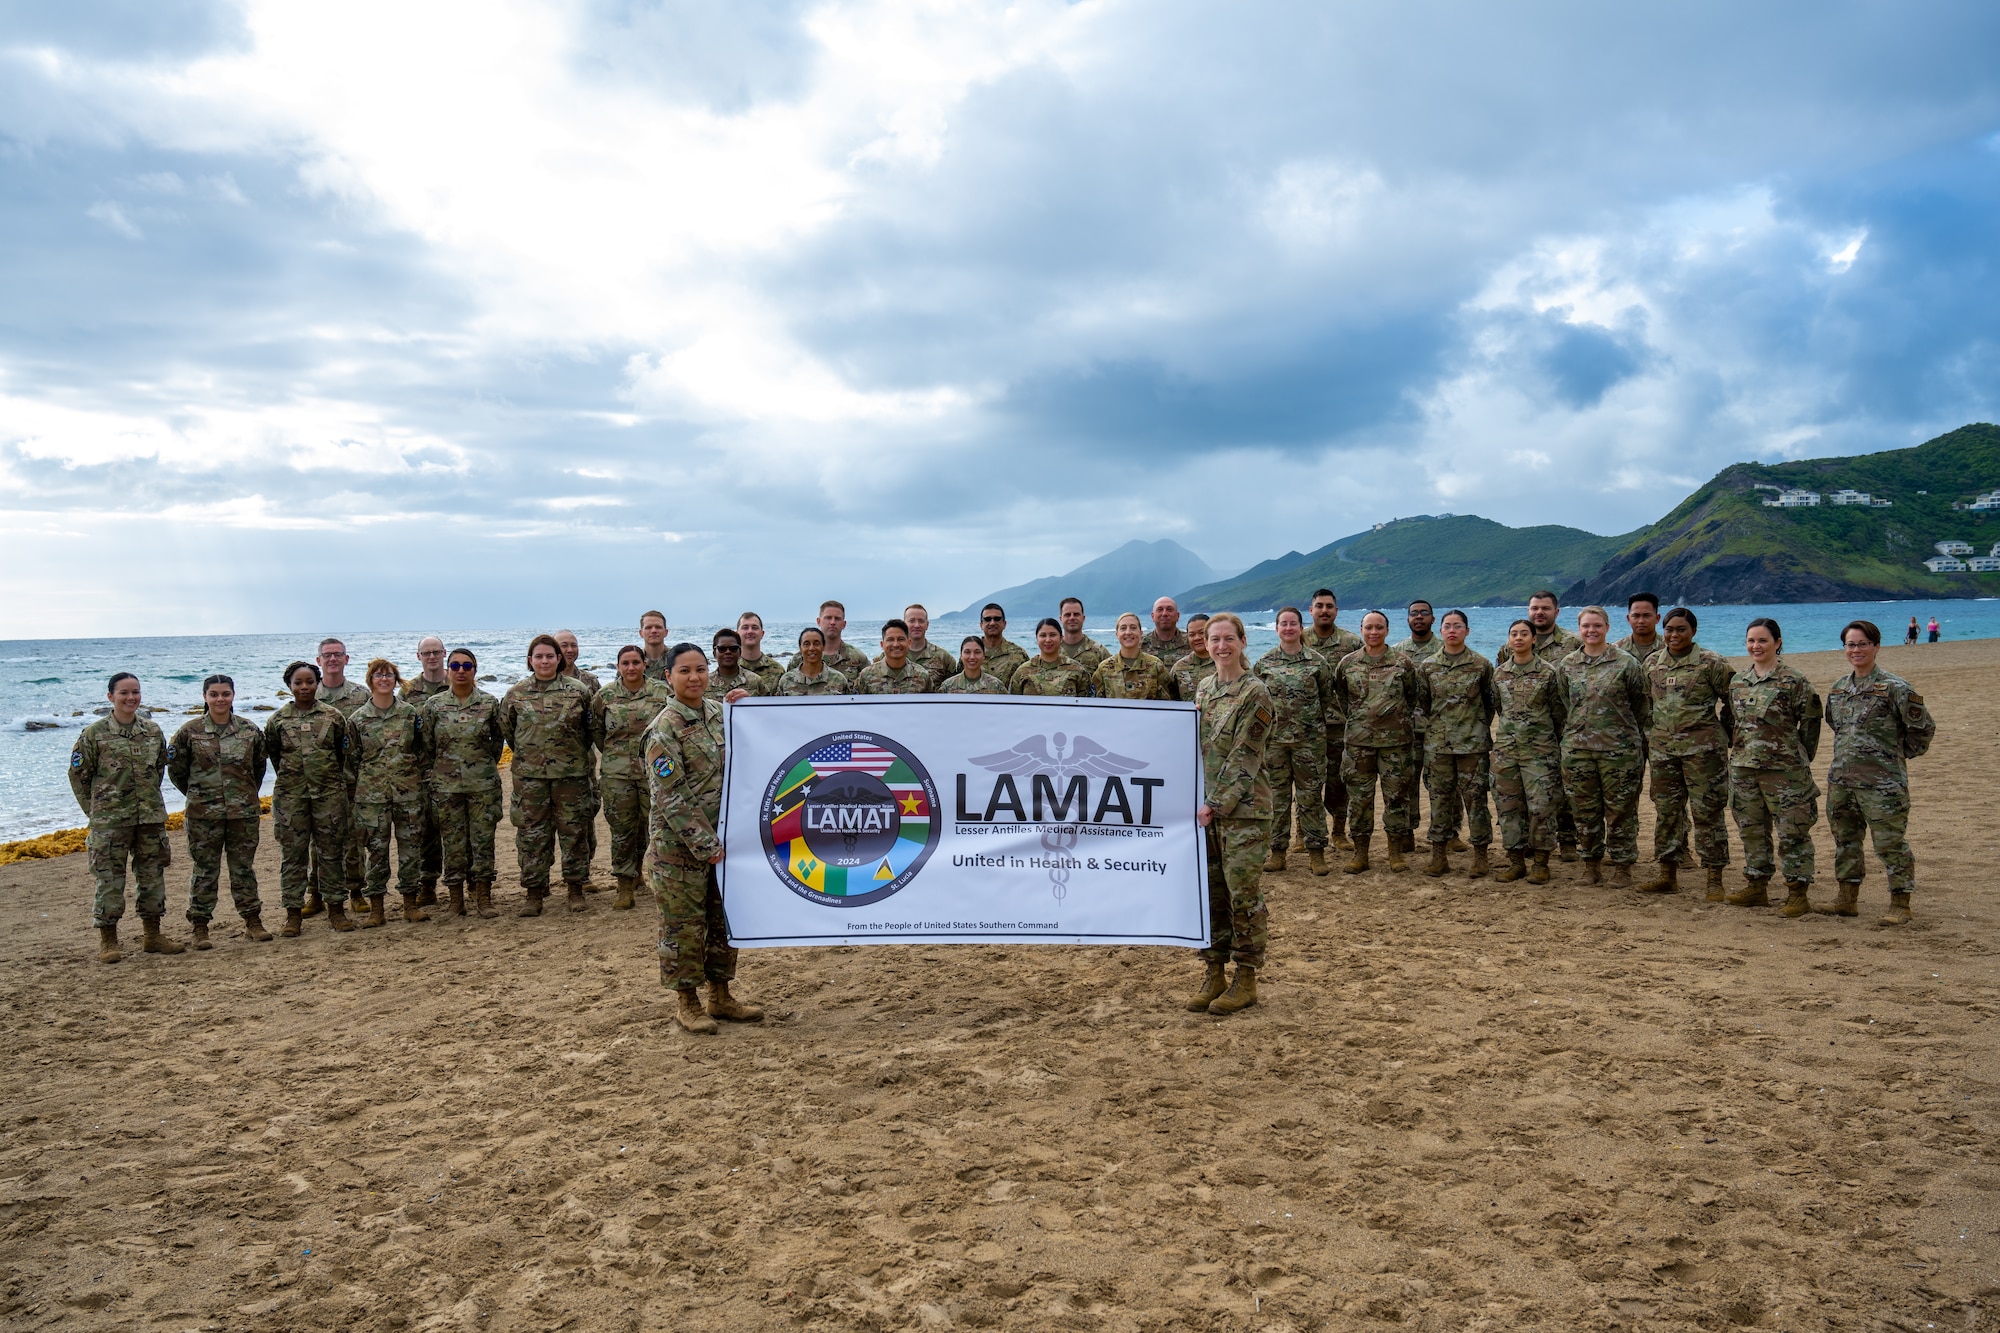 U.S. Air Force active-duty and reserve Airmen pose for a group photo during the Lesser Antilles Medical Assistance Team mission in St. Kitts and Nevis, March 17, 2024. This was the first opportunity for the U.S. Southern Command directed medical team to collaborate and partner with St. Kitts and Nevis medical professionals to deliver support and resources to the island nation and its healthcare system. (U.S. Air Force photo by Senior Airman John Rossi)